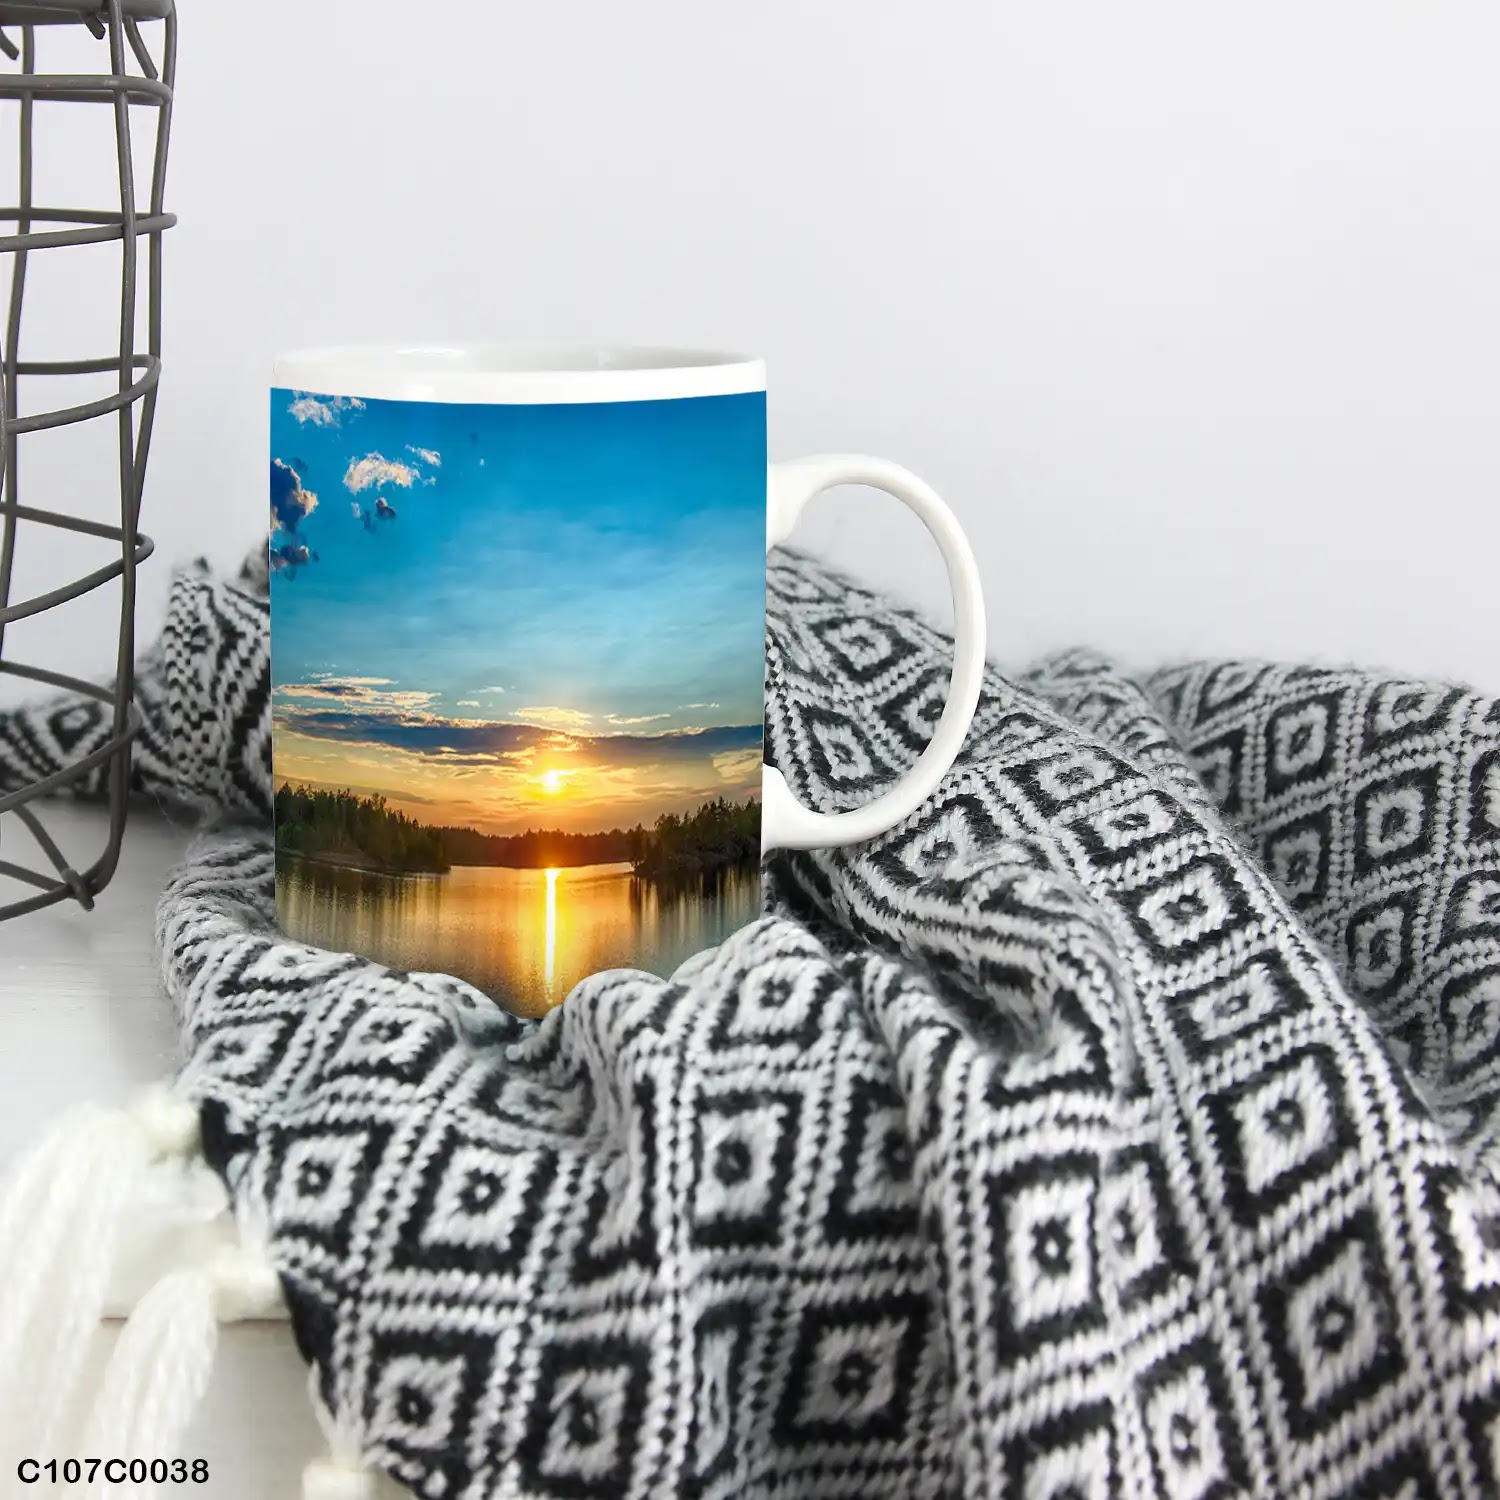 A mug (cup) printed with an image of a lake at sunset